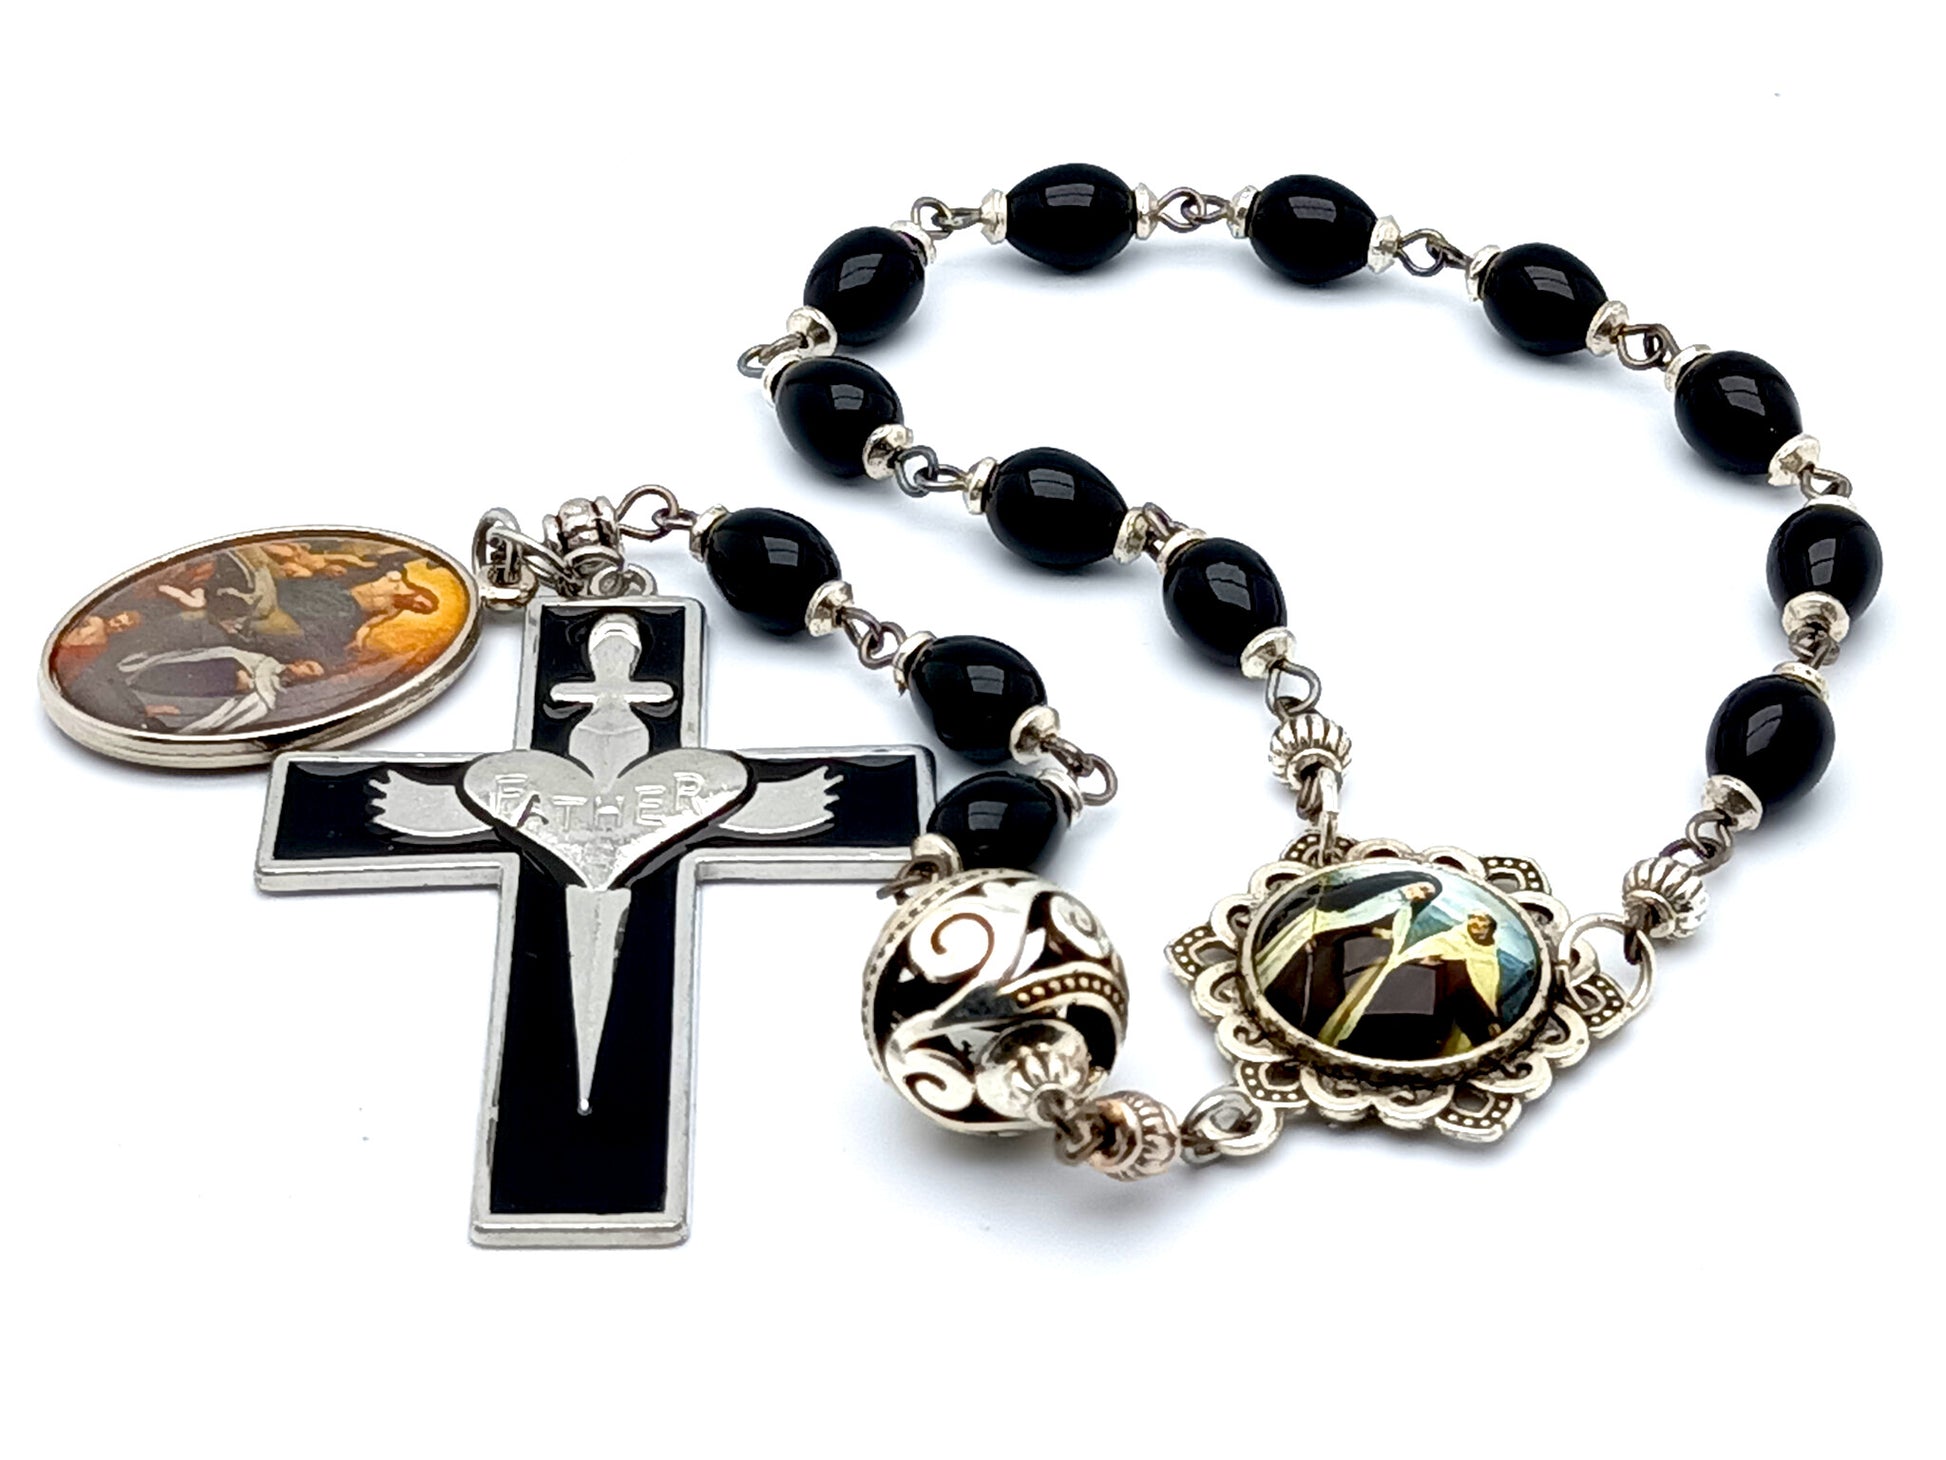 Saint Terese of Avila unique rosary beads single decade rosary with black wooden and silver beads, silver and black enamel Holy Sprit crucifix and picture centre medal.